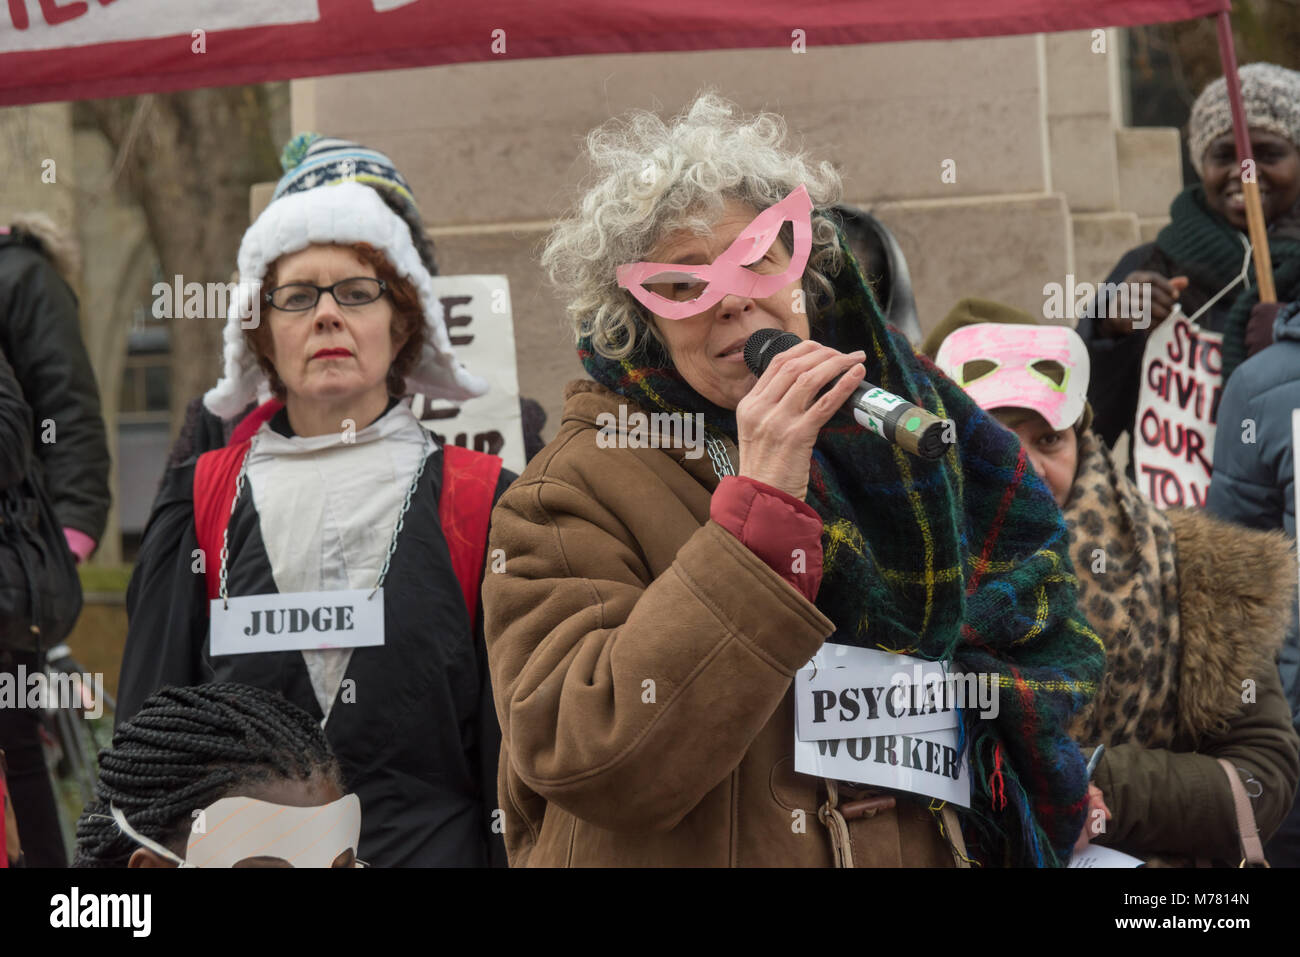 London, UK. 8th March 2018. A psychiatric social worker gives evidence of why the break up families at the Global Women's Strike mock trial of the Family Courts in an International Women’s Day protest in front of Parliament. Speakers included mothers who have had children unjustly removed and others who read out shocking comments made in court by judges. The UK has the highest rate of adoptions in Europe, almost all without consent of their birth family. In some working class areas, 50% of children are referred to social services and that families of colour, immigrant and disabled are all disp Stock Photo